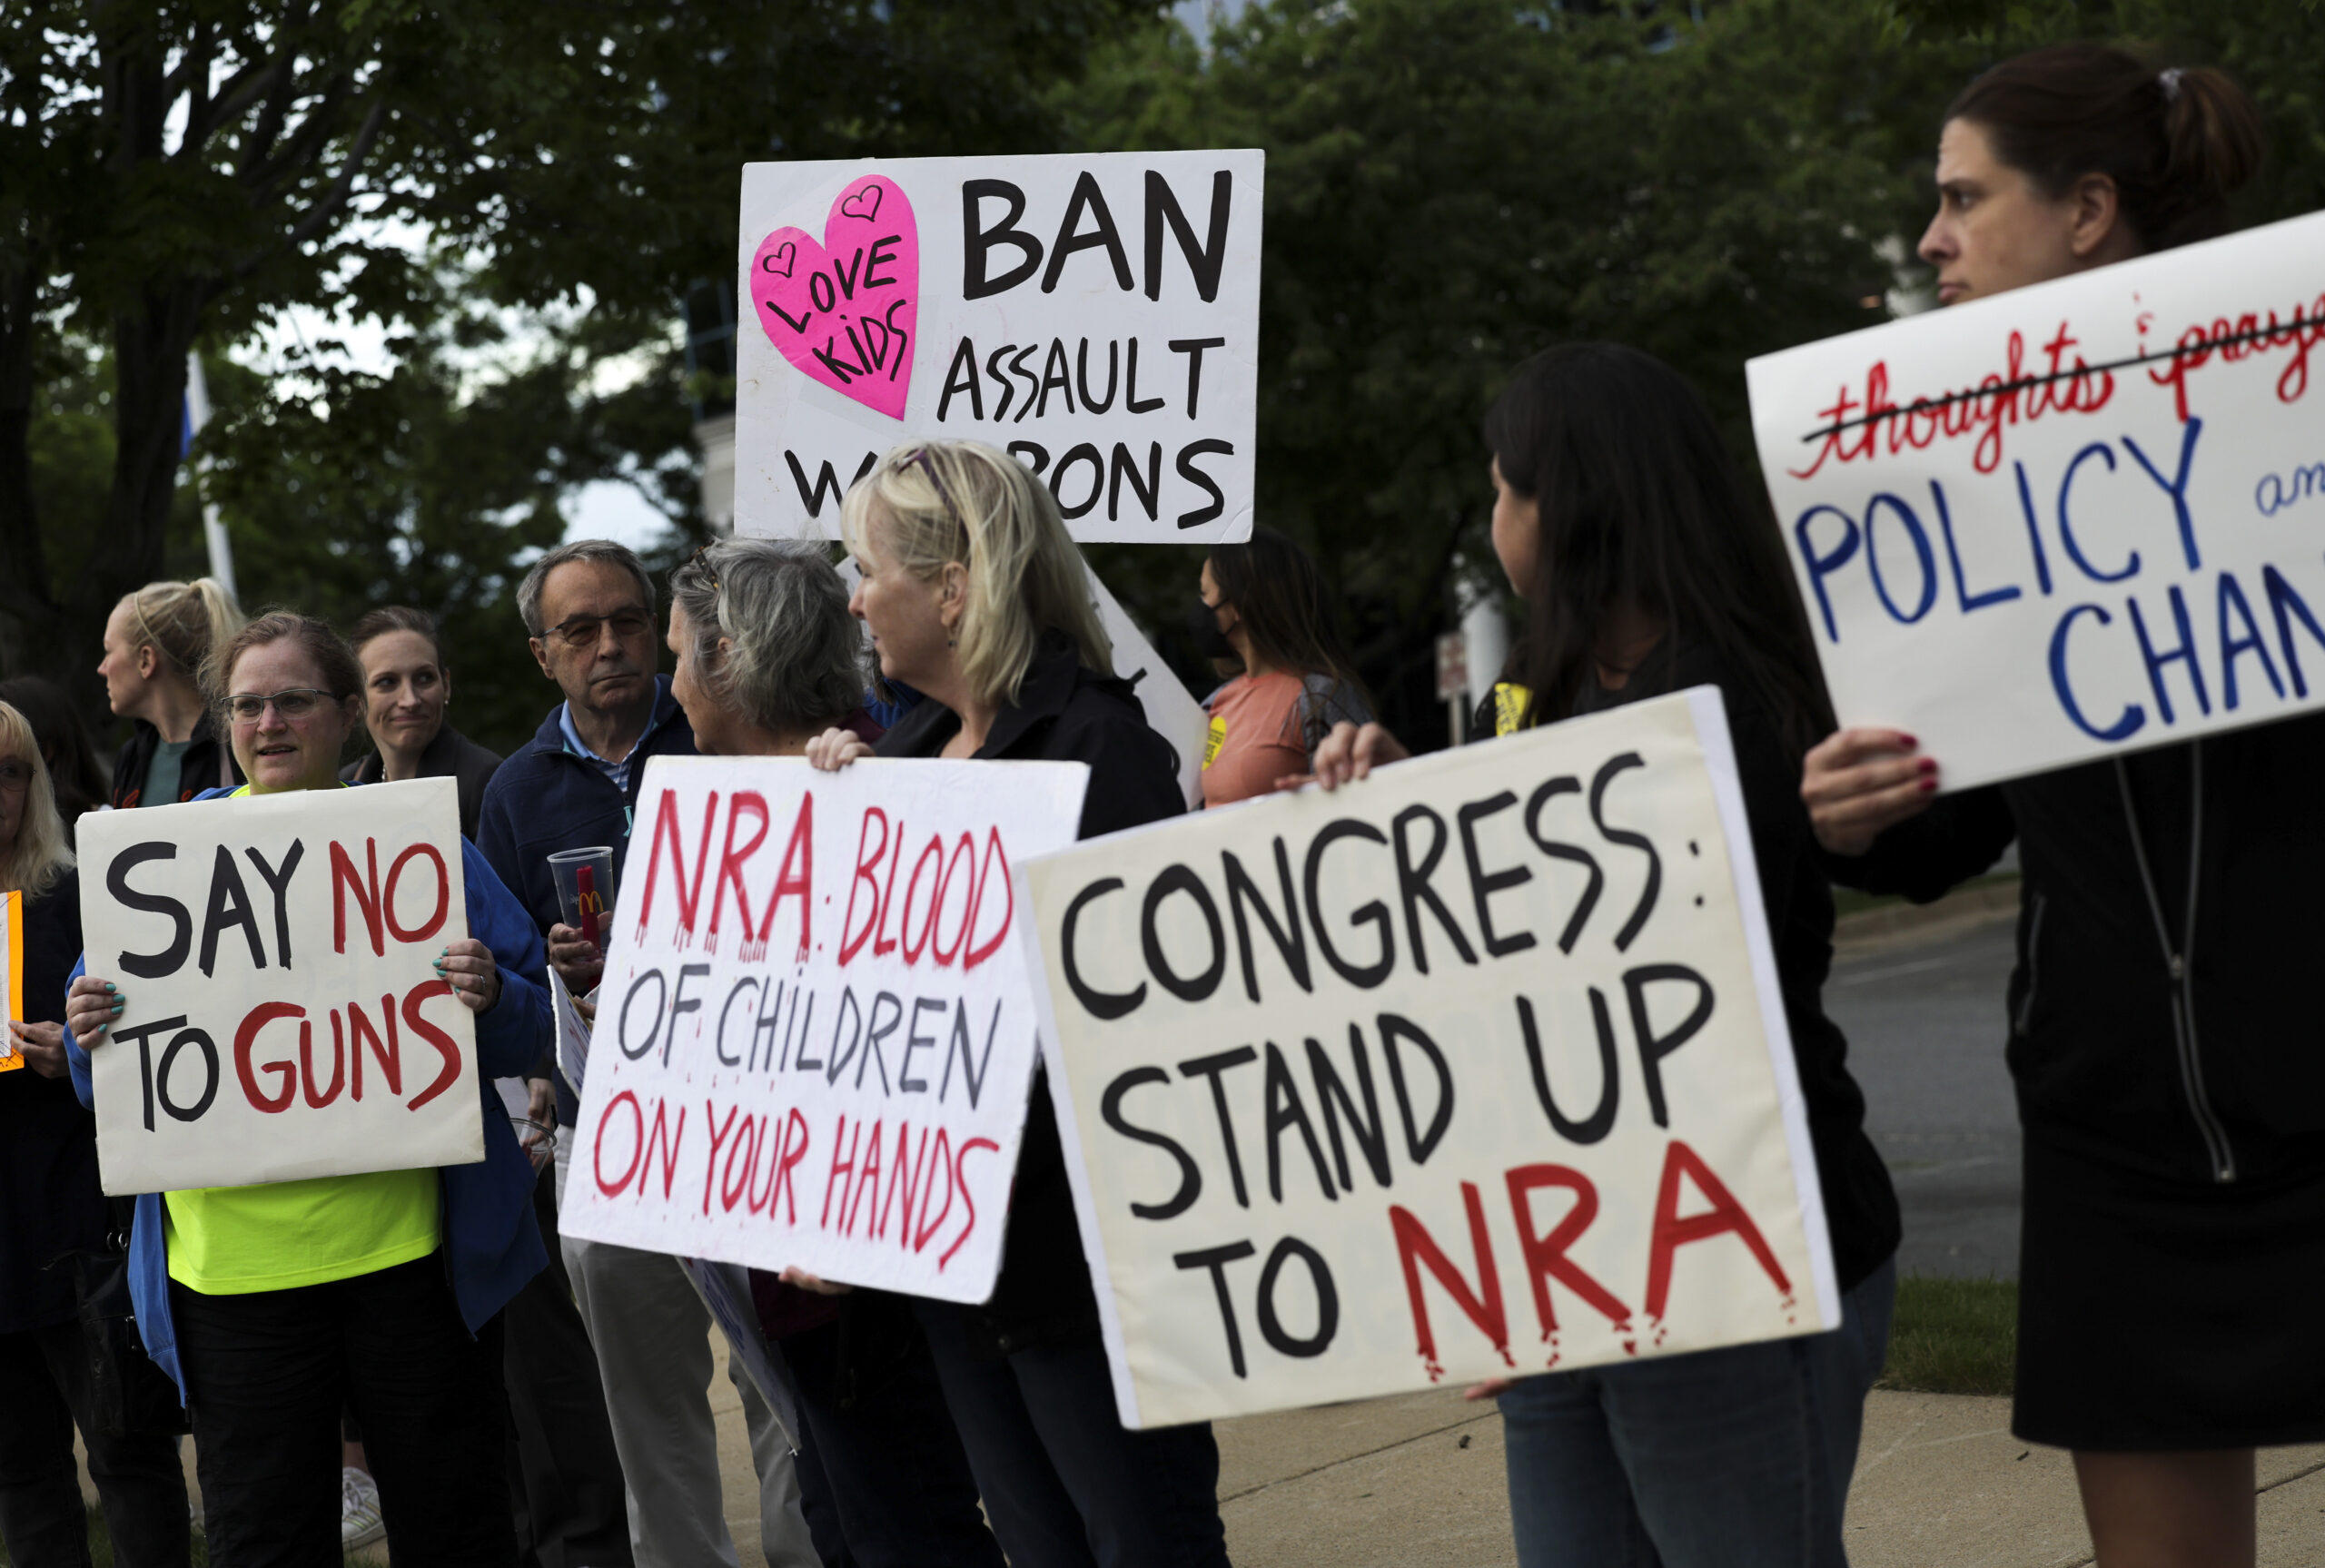 Post-Uvalde Poll Shows Overwhelming 88% Support for Background Checks, While 67% Back Assault Weapons Ban